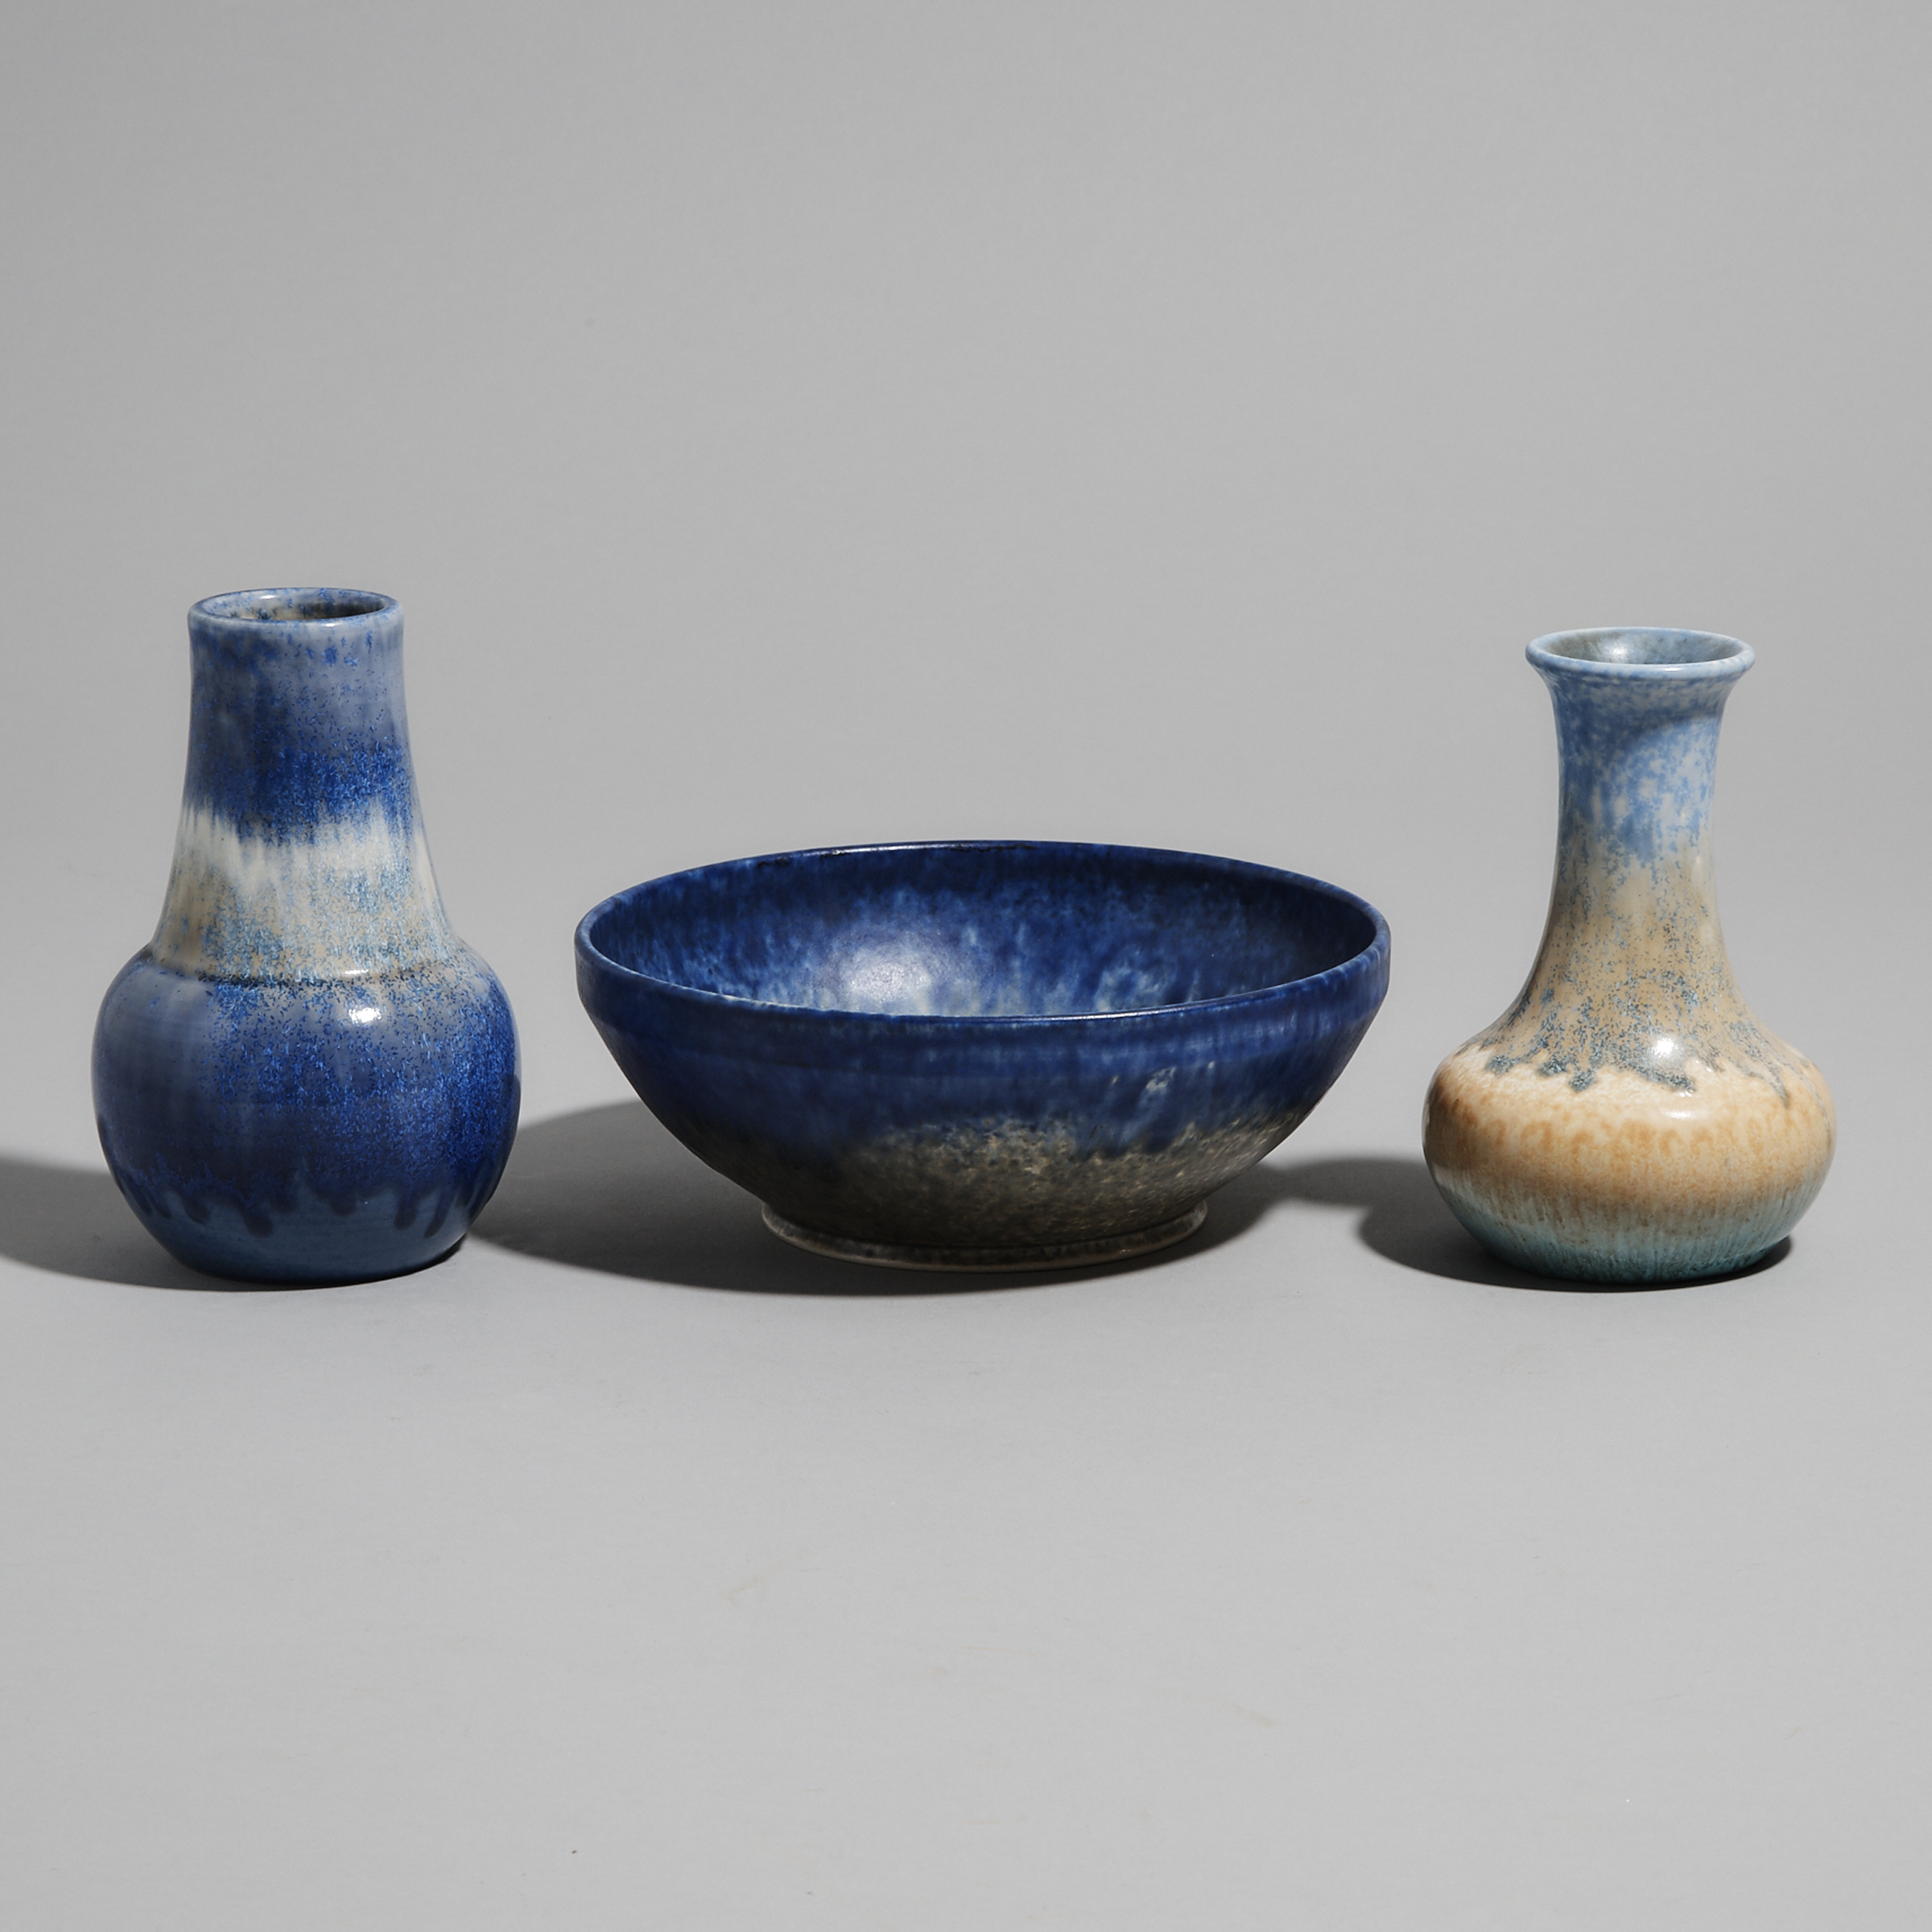 Two Ruskin Mottled Glazed Vases and a Bowl, 1930/31